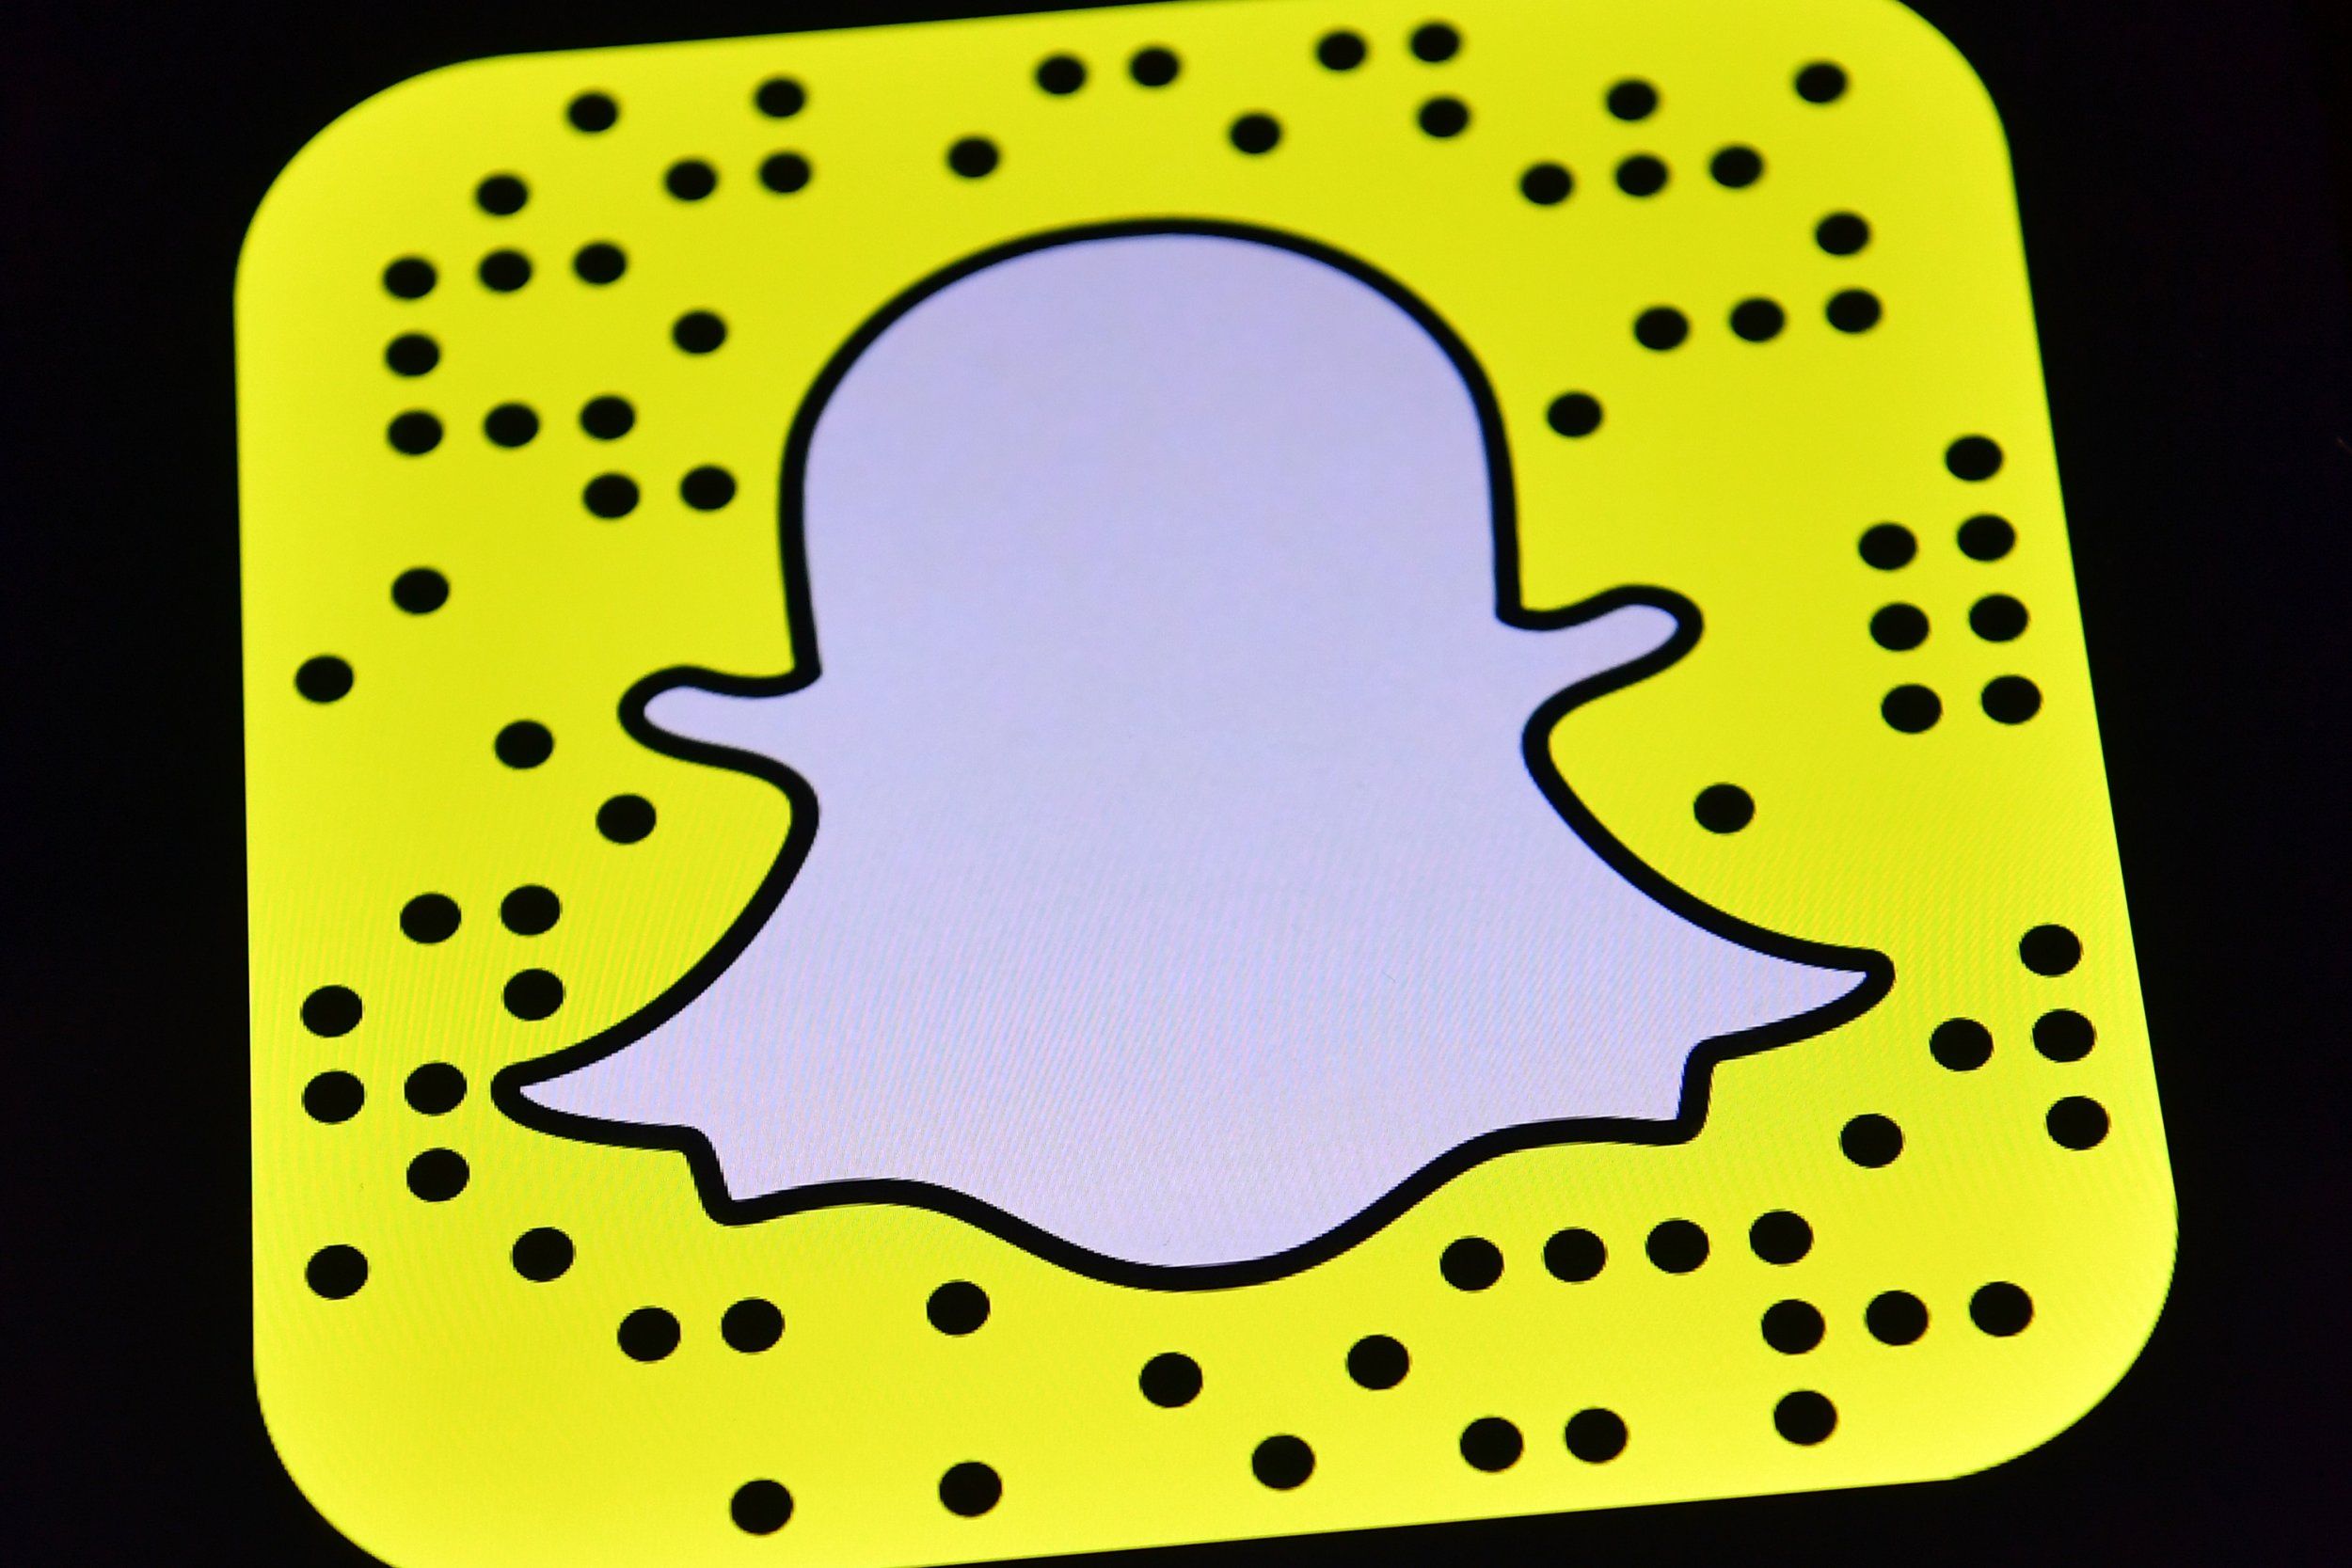 Fixing the "Snapchat not compatible with my device" error